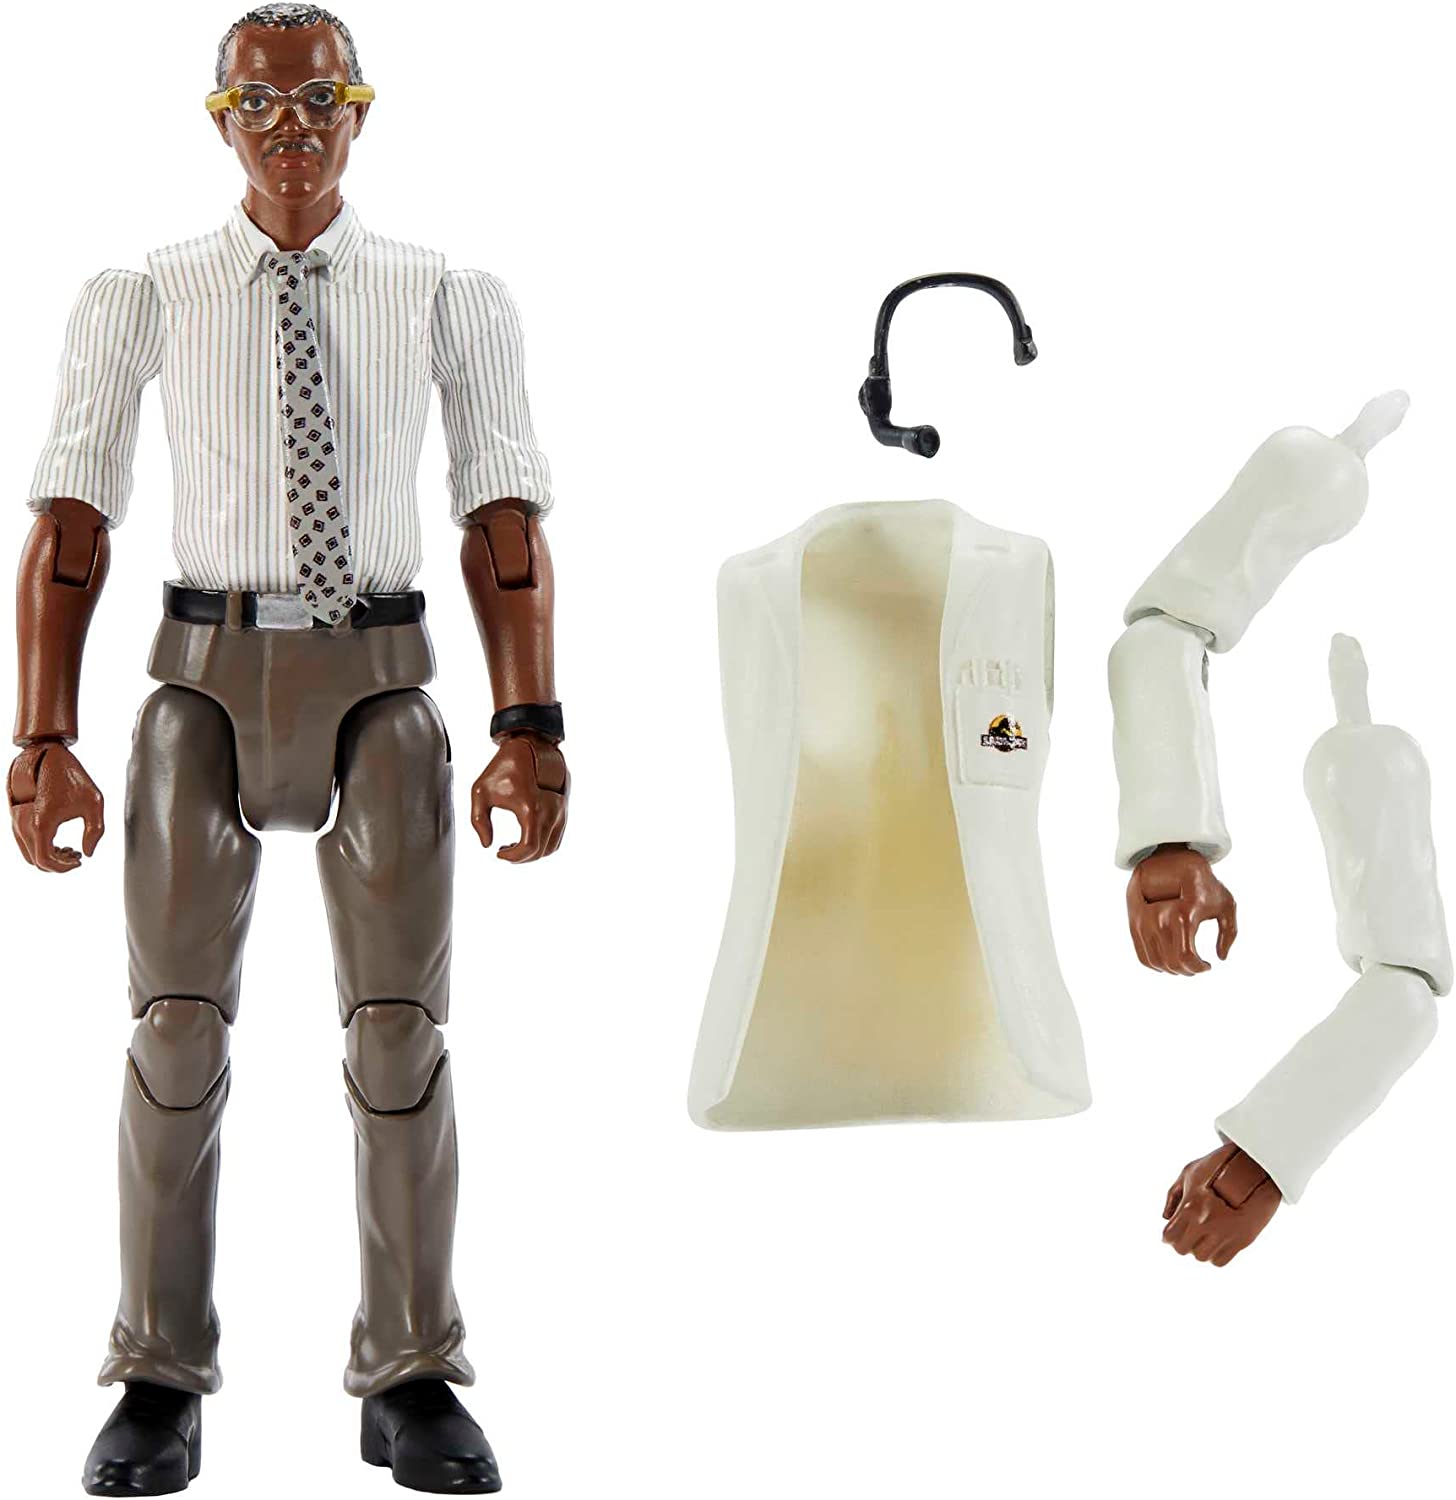 Jurassic World Jurassic Park Hammond Collection Human Action Figure, Ray Arnold with Articulation, 3.75-in Tall